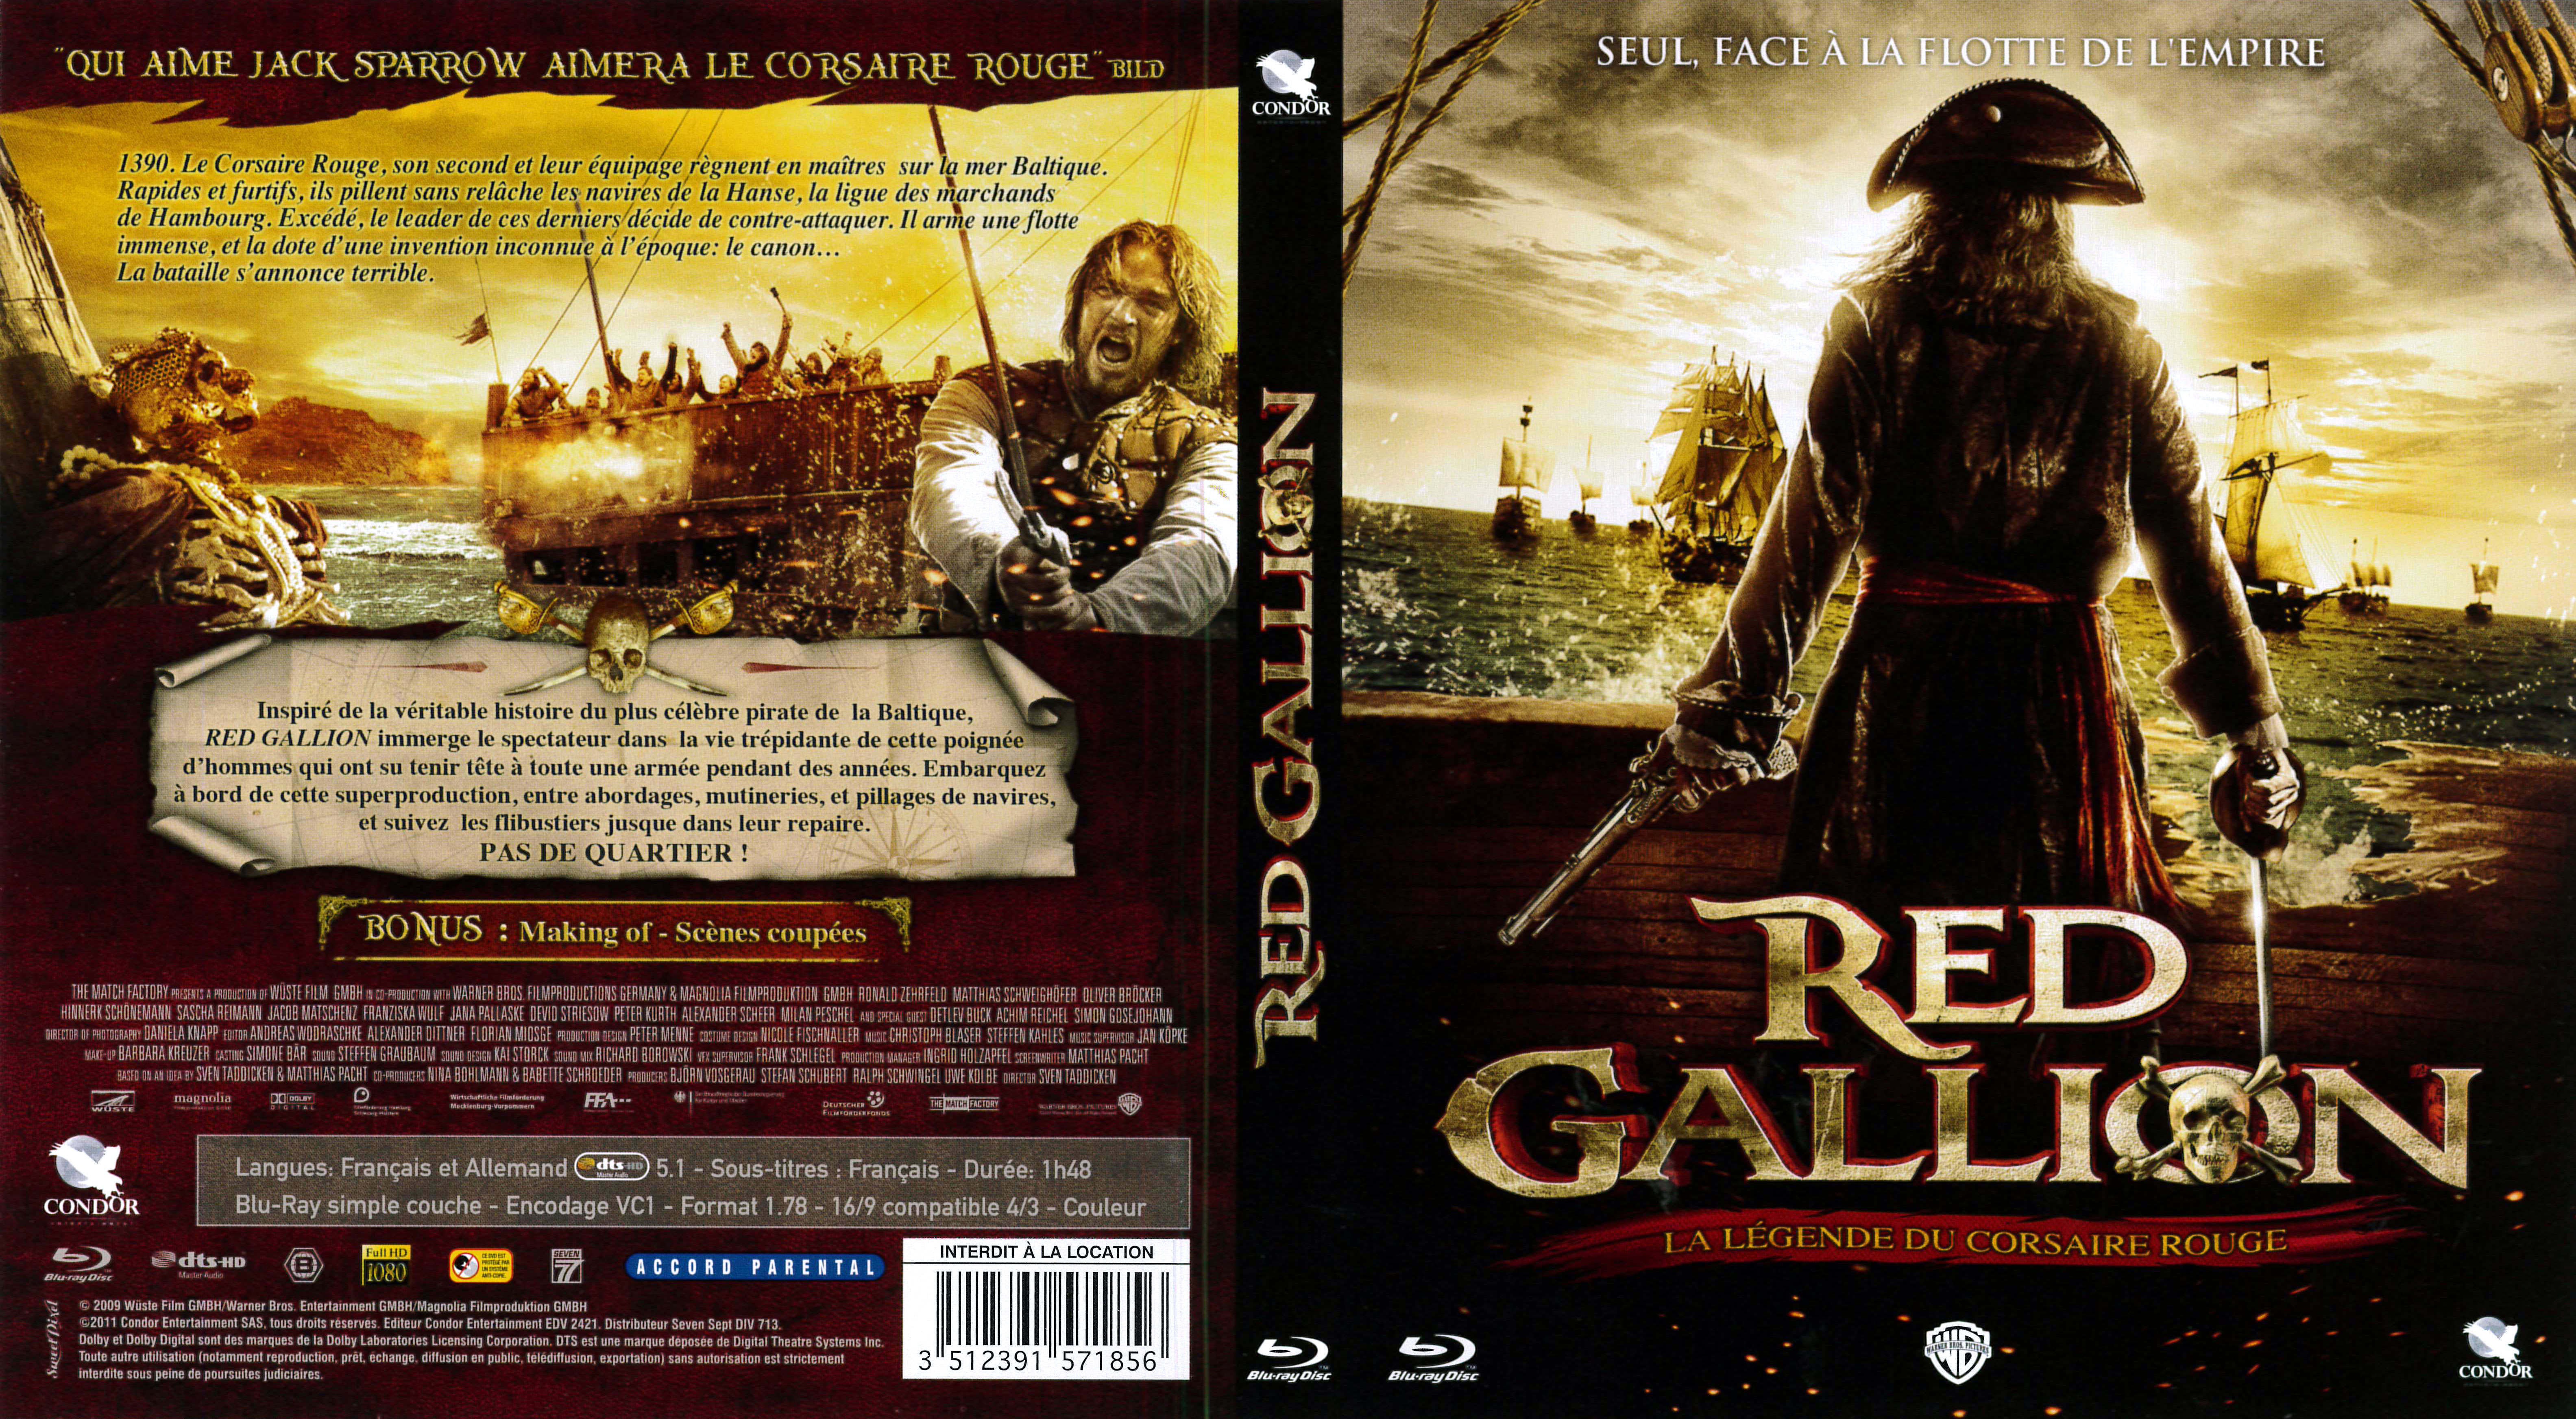 Jaquette DVD Red galion (BLU-RAY)